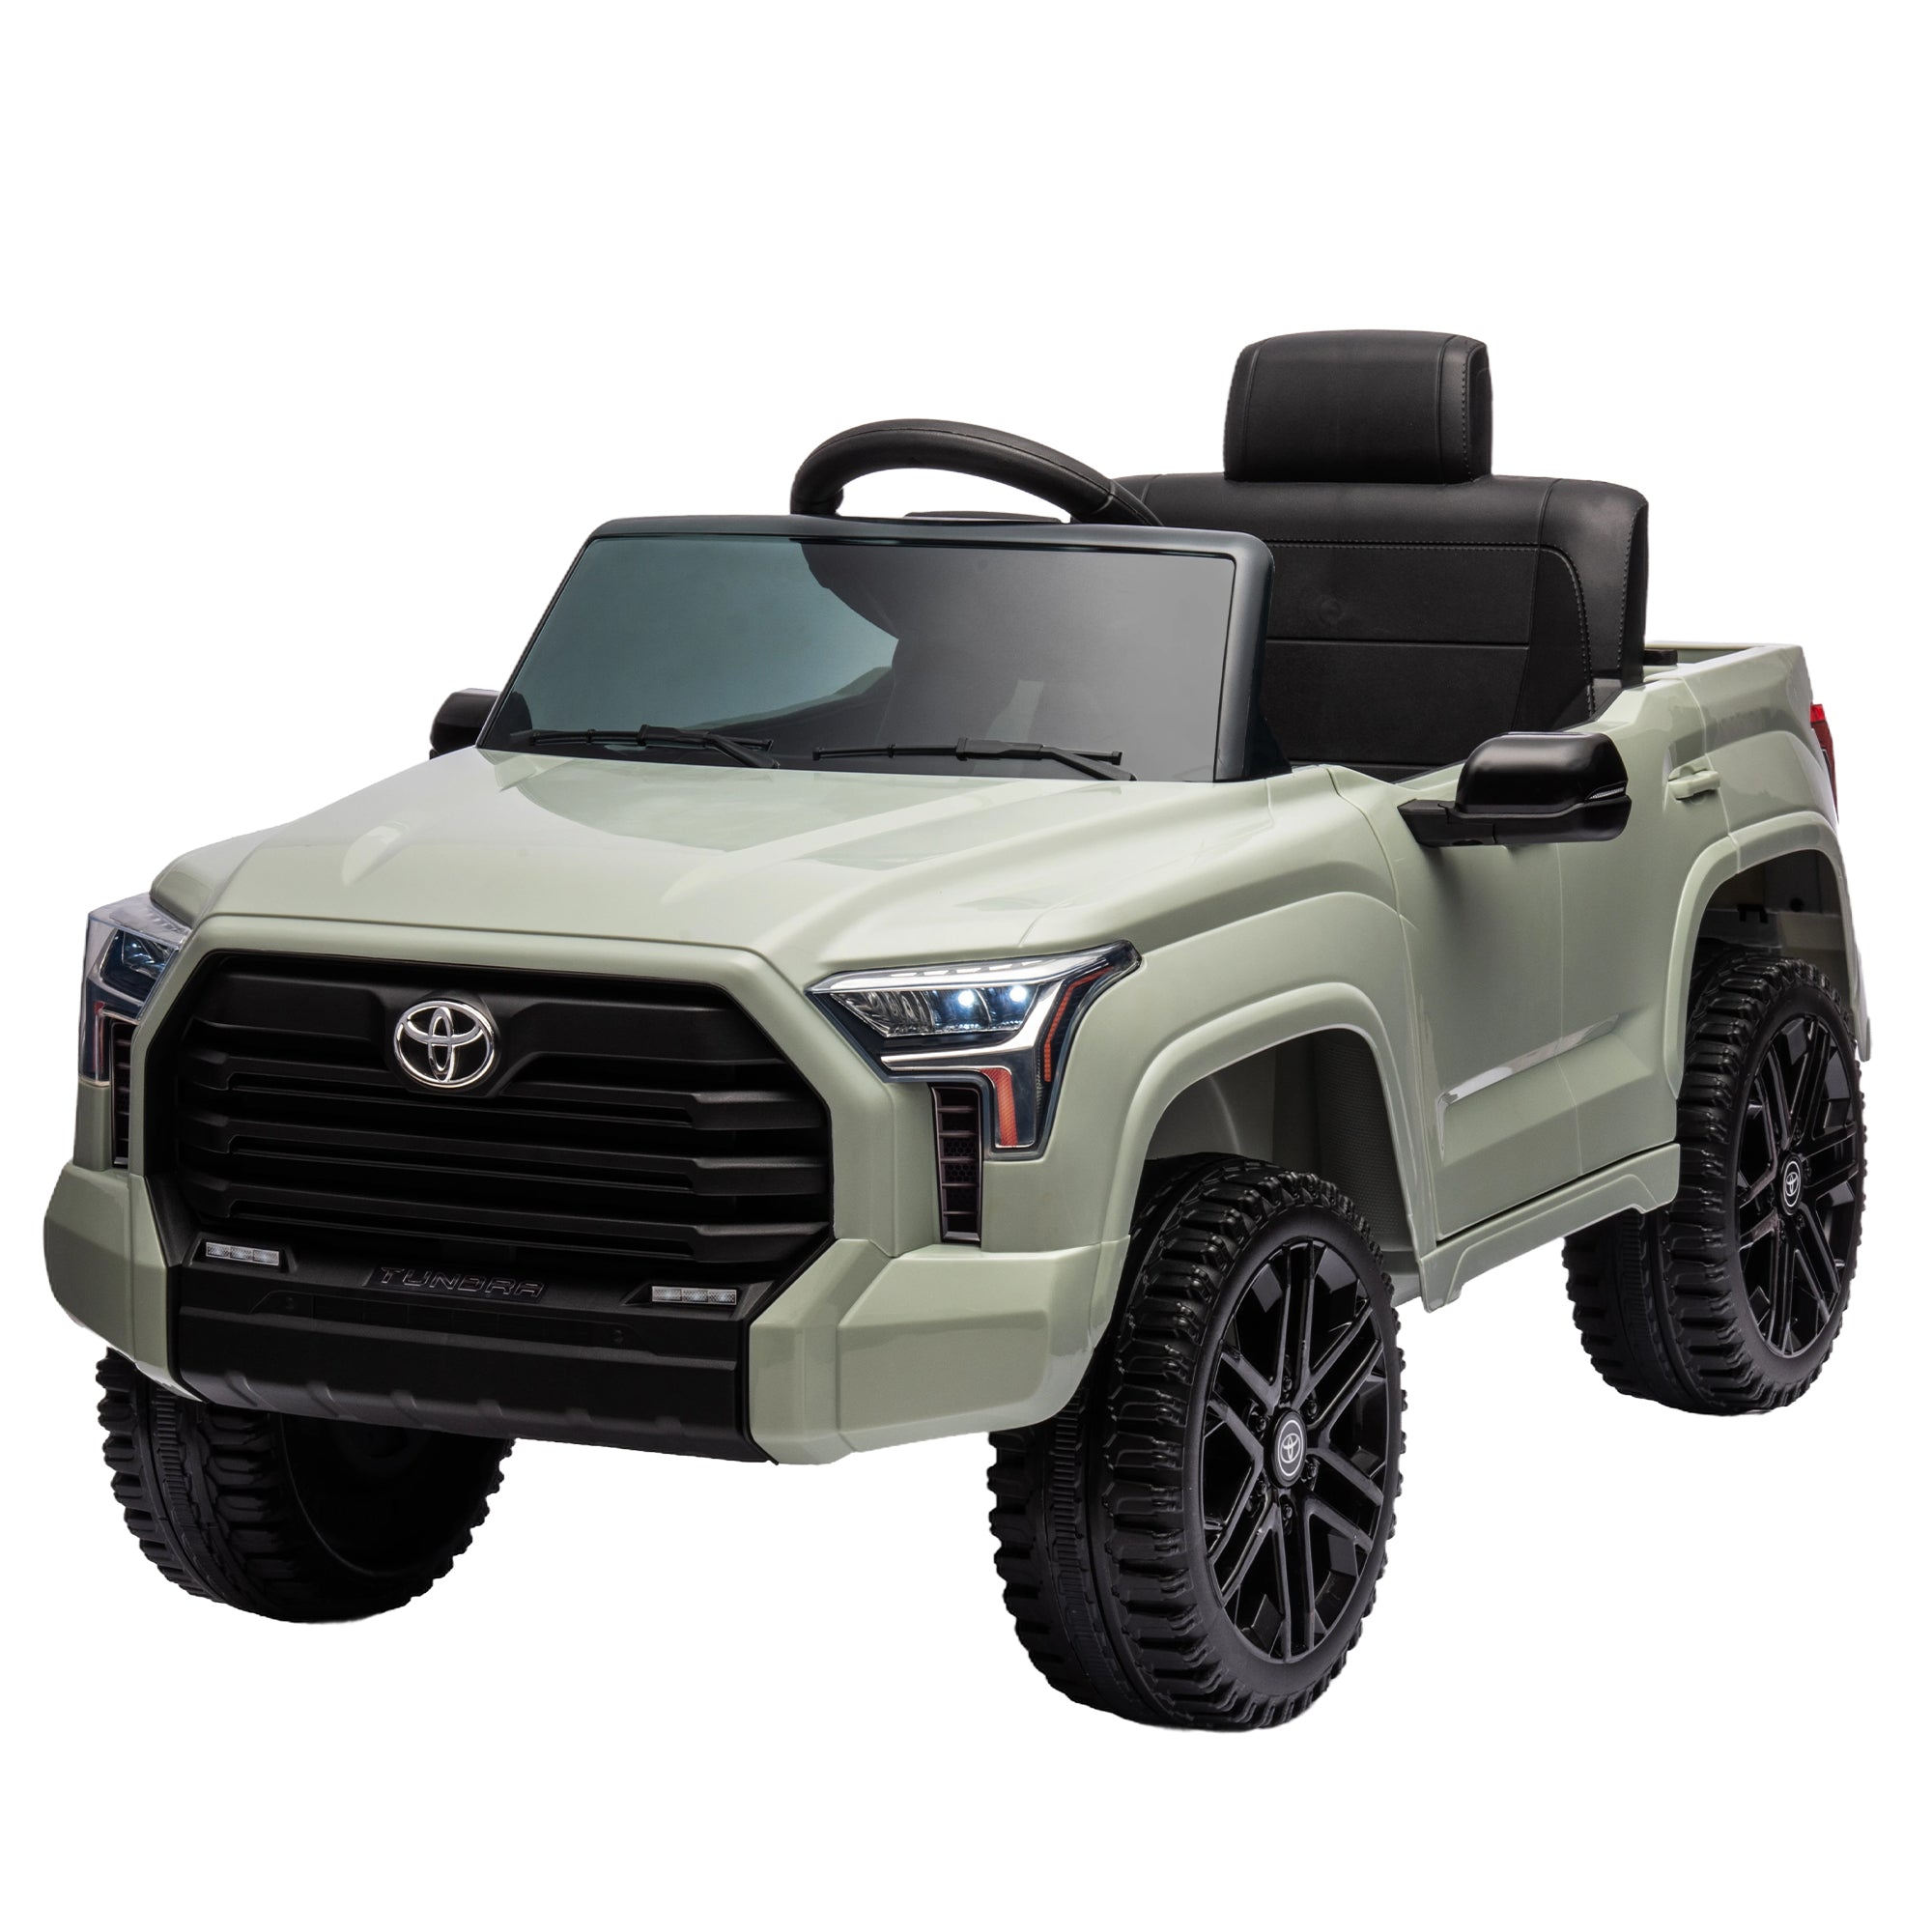 Licensed Toyota Tundra Electric Pickup Truck - 12V Ride-On Toy for Kids